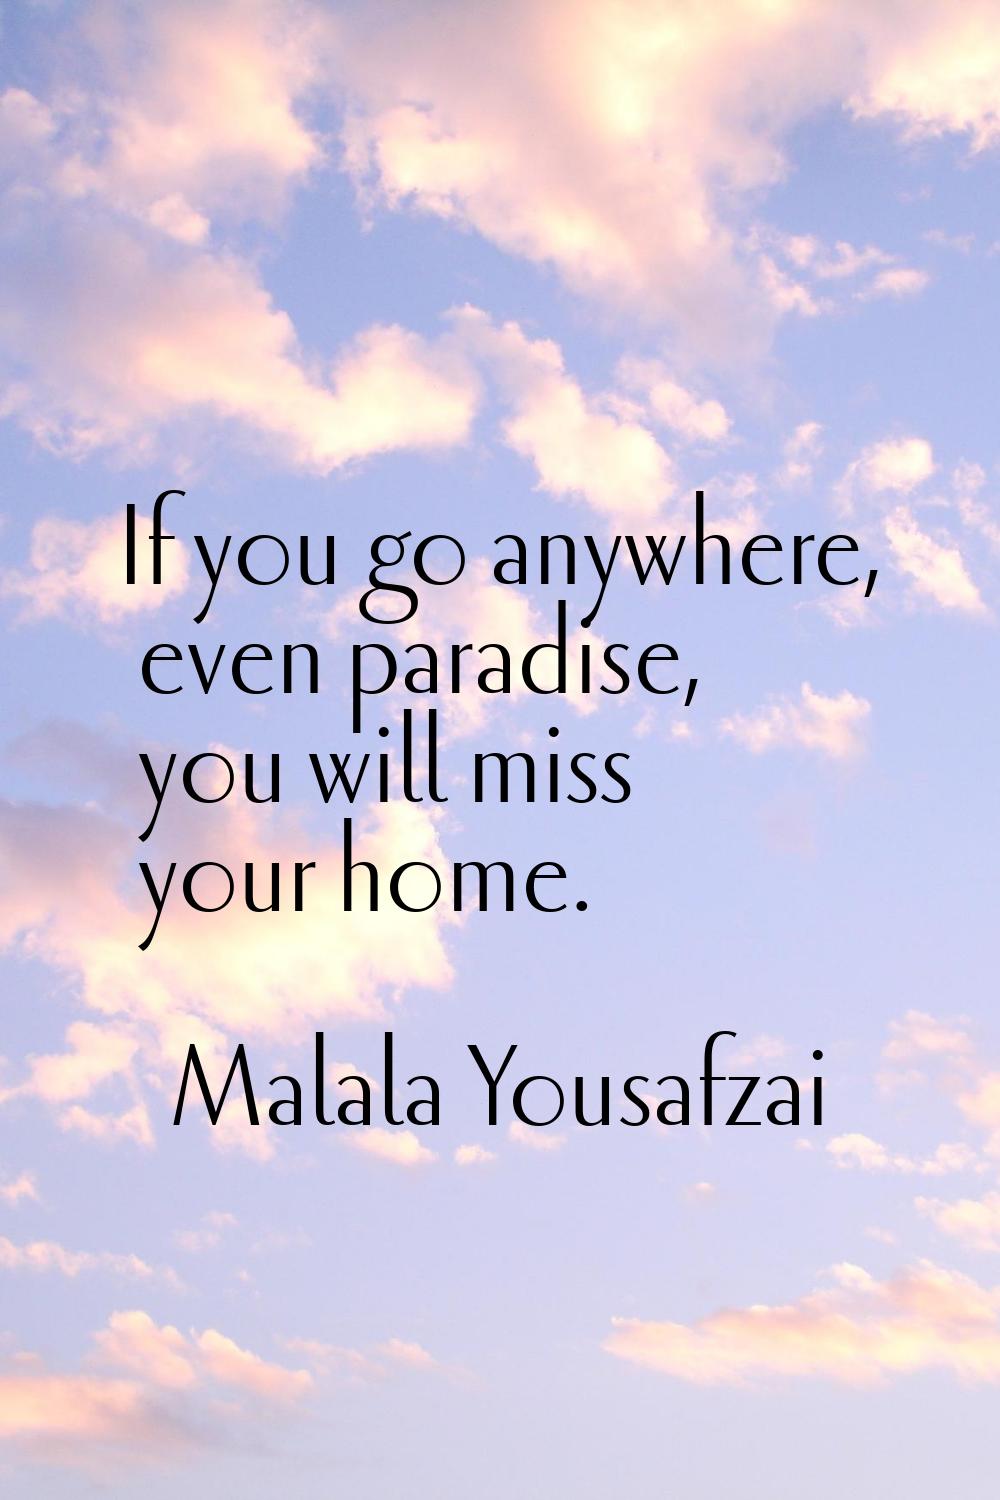 If you go anywhere, even paradise, you will miss your home.